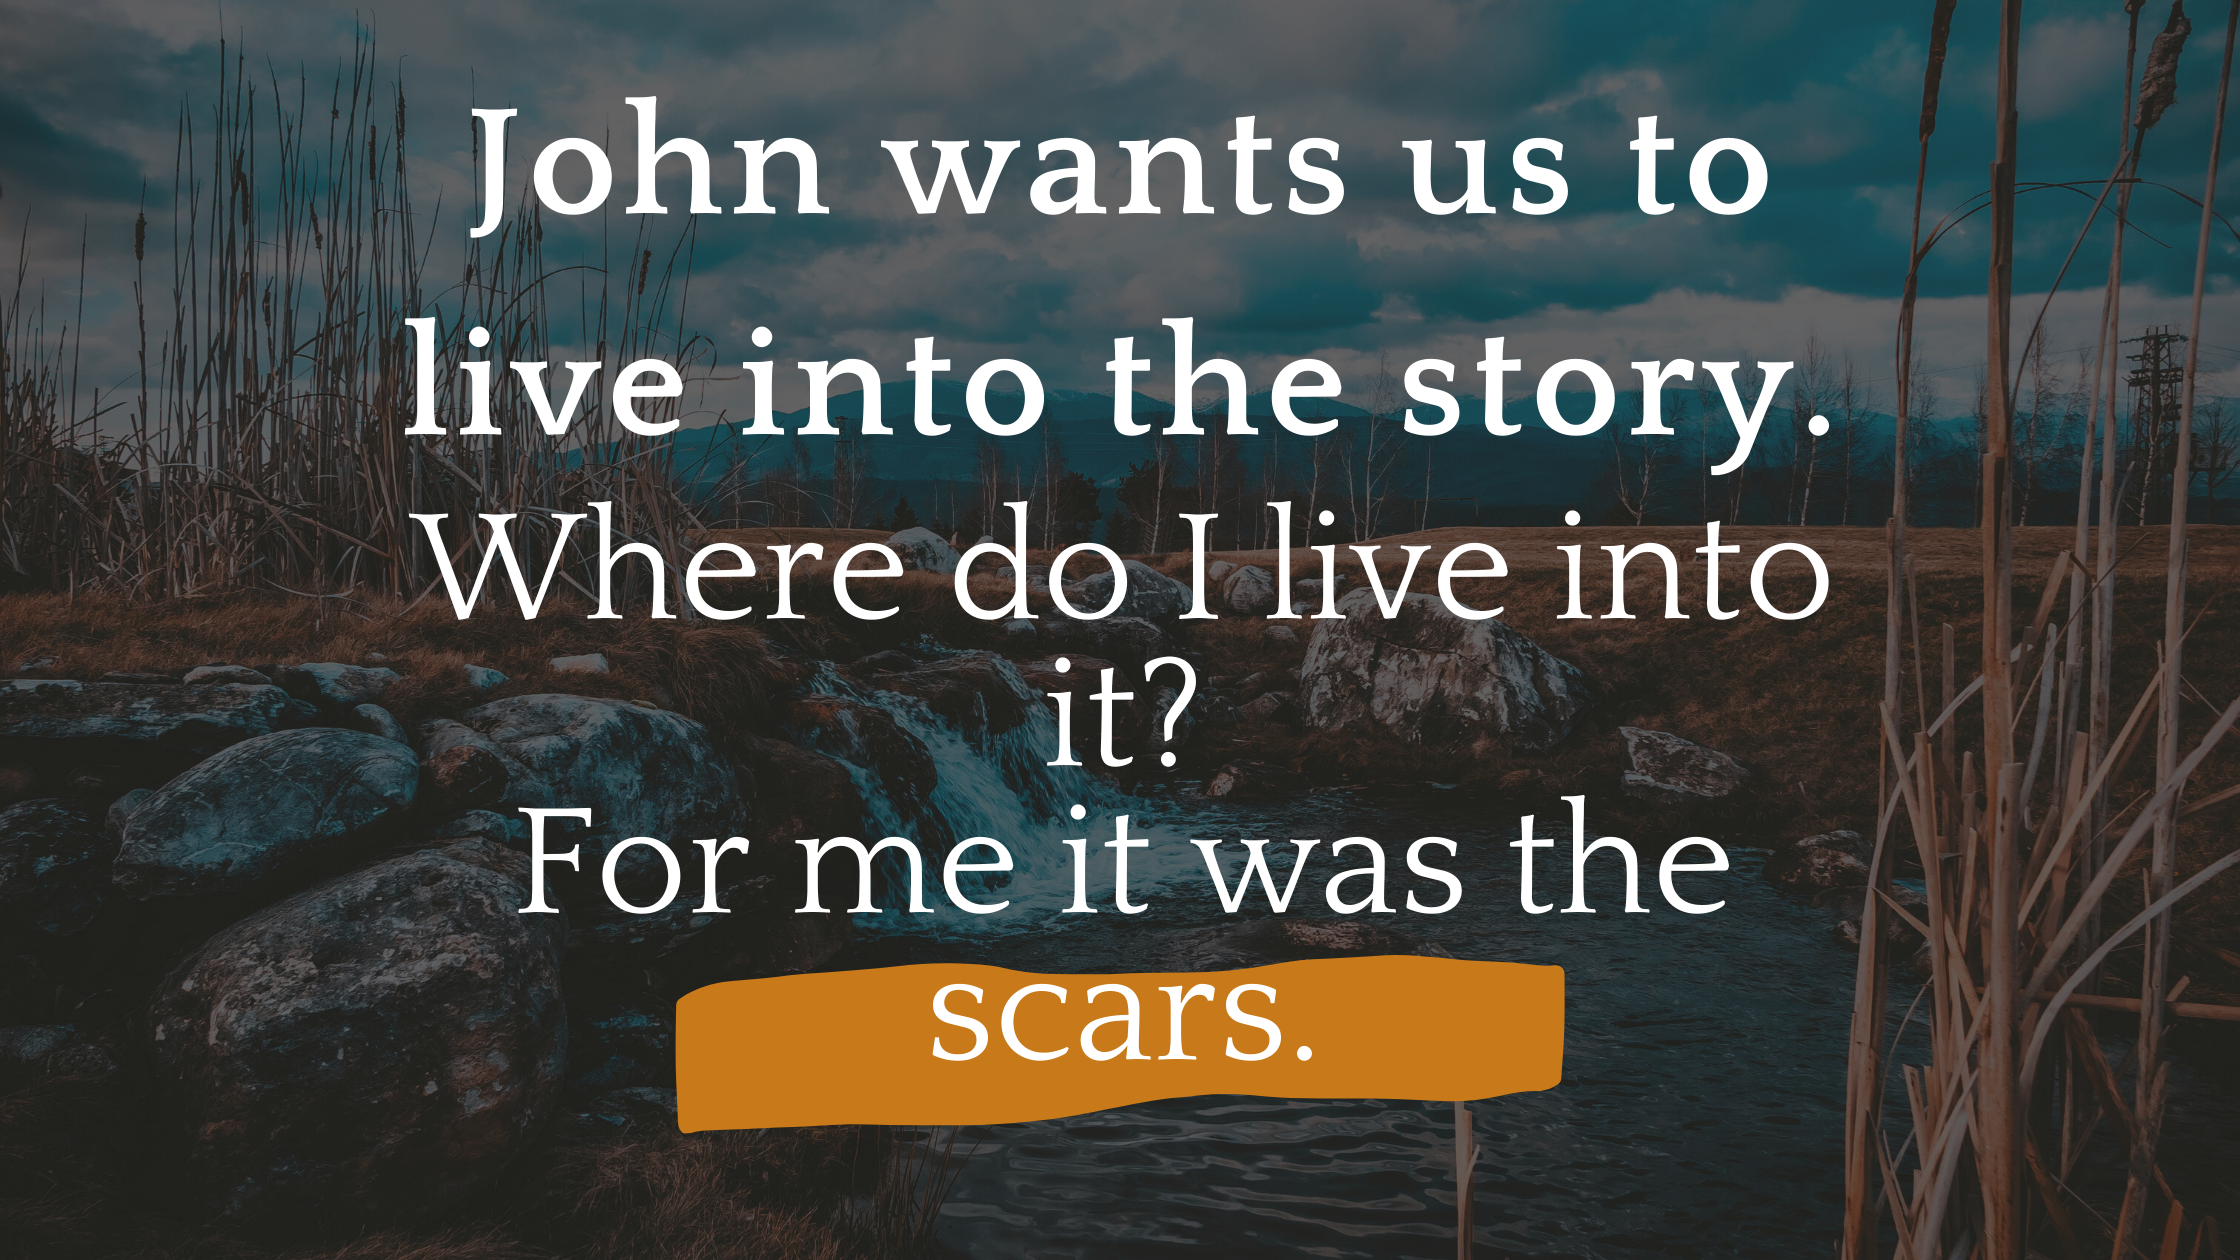 John wants us to live into the story. Where do I live into it? For me it was the scars.